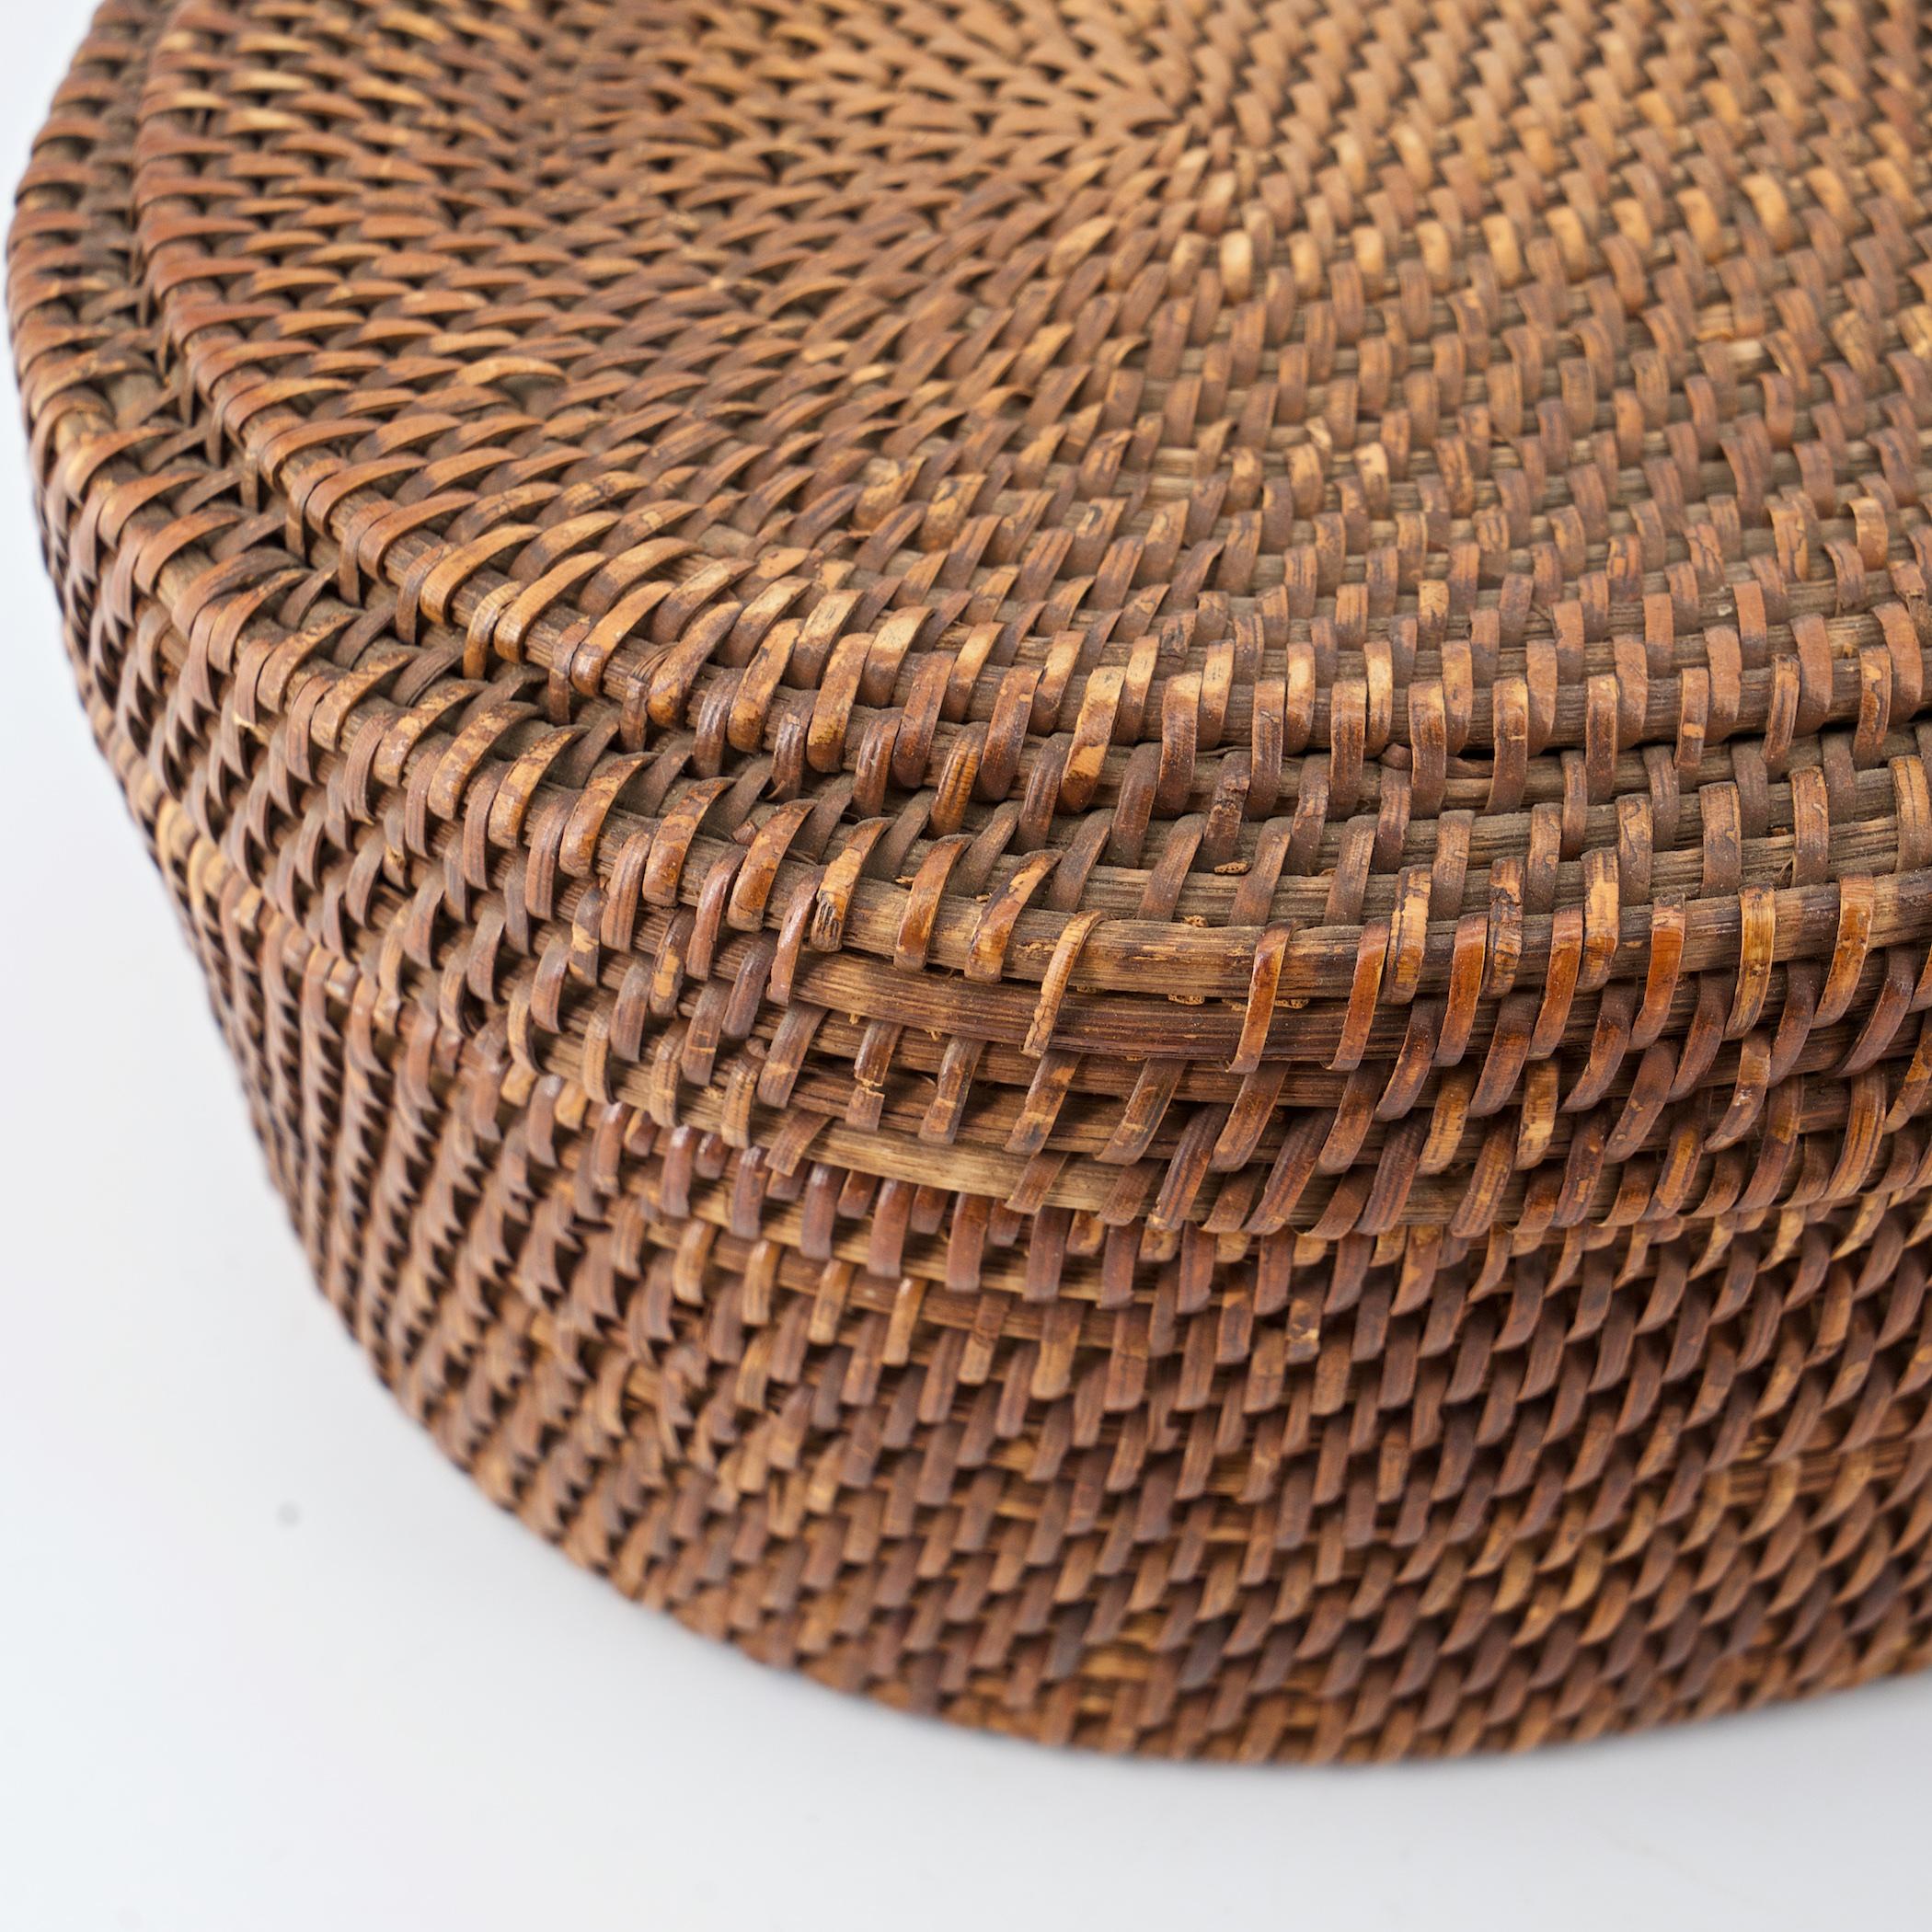 Native American Indian Woven Coiled Lidded Oval Basket 6